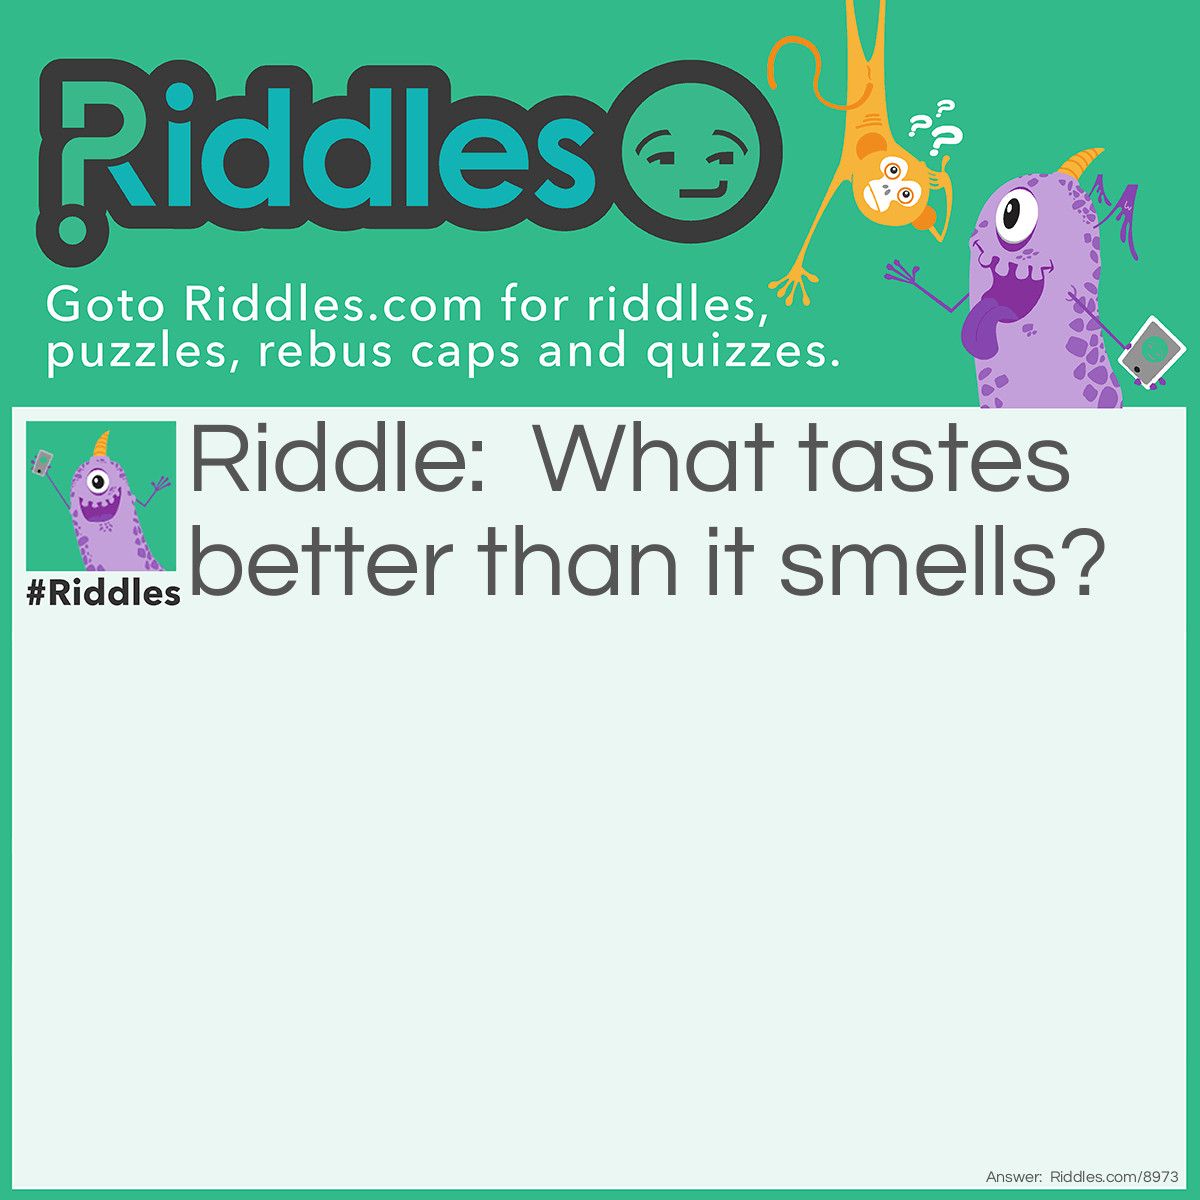 Riddle: What tastes better than it smells? Answer: Your tongue. You use it to taste, and it tastes things better than it smells.